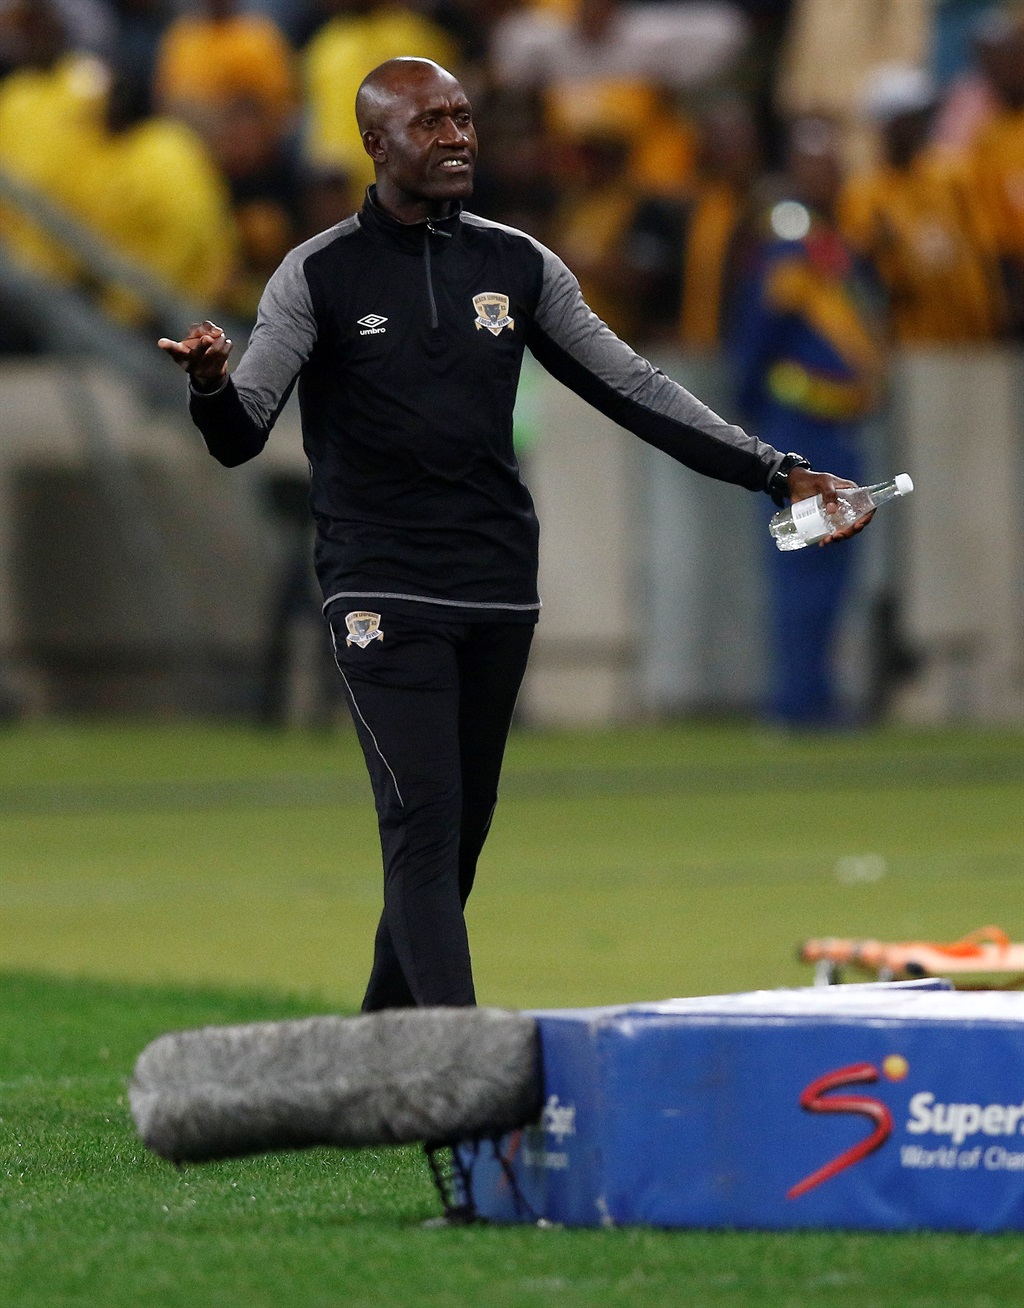 DURBAN, SOUTH AFRICA - AUGUST 10: Patrick Mabedi  of Black Leopards during the Absa Premiership match between Kaizer Chiefs and Black Leopards at Moses Mabhida Stadium on August 10, 2019 in Durban, South Africa. (Photo by Anesh Debiky/Gallo Images)